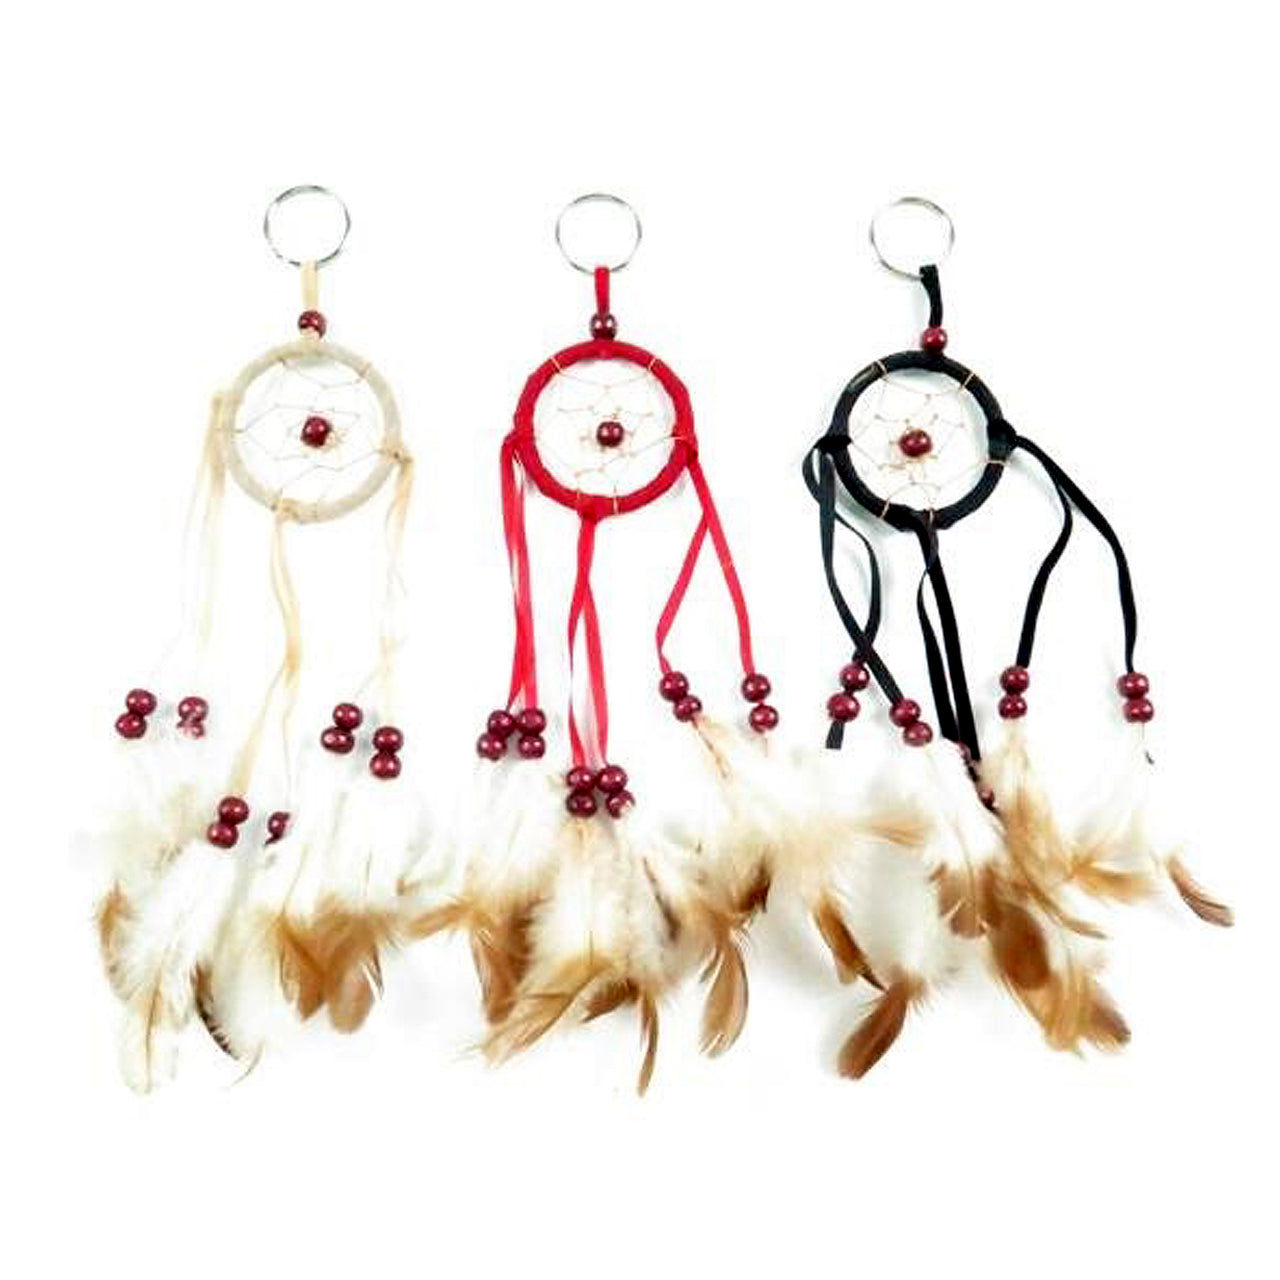 MK-KY371 : Key Chain Circle Dream Catcher With Feather  1 DZ